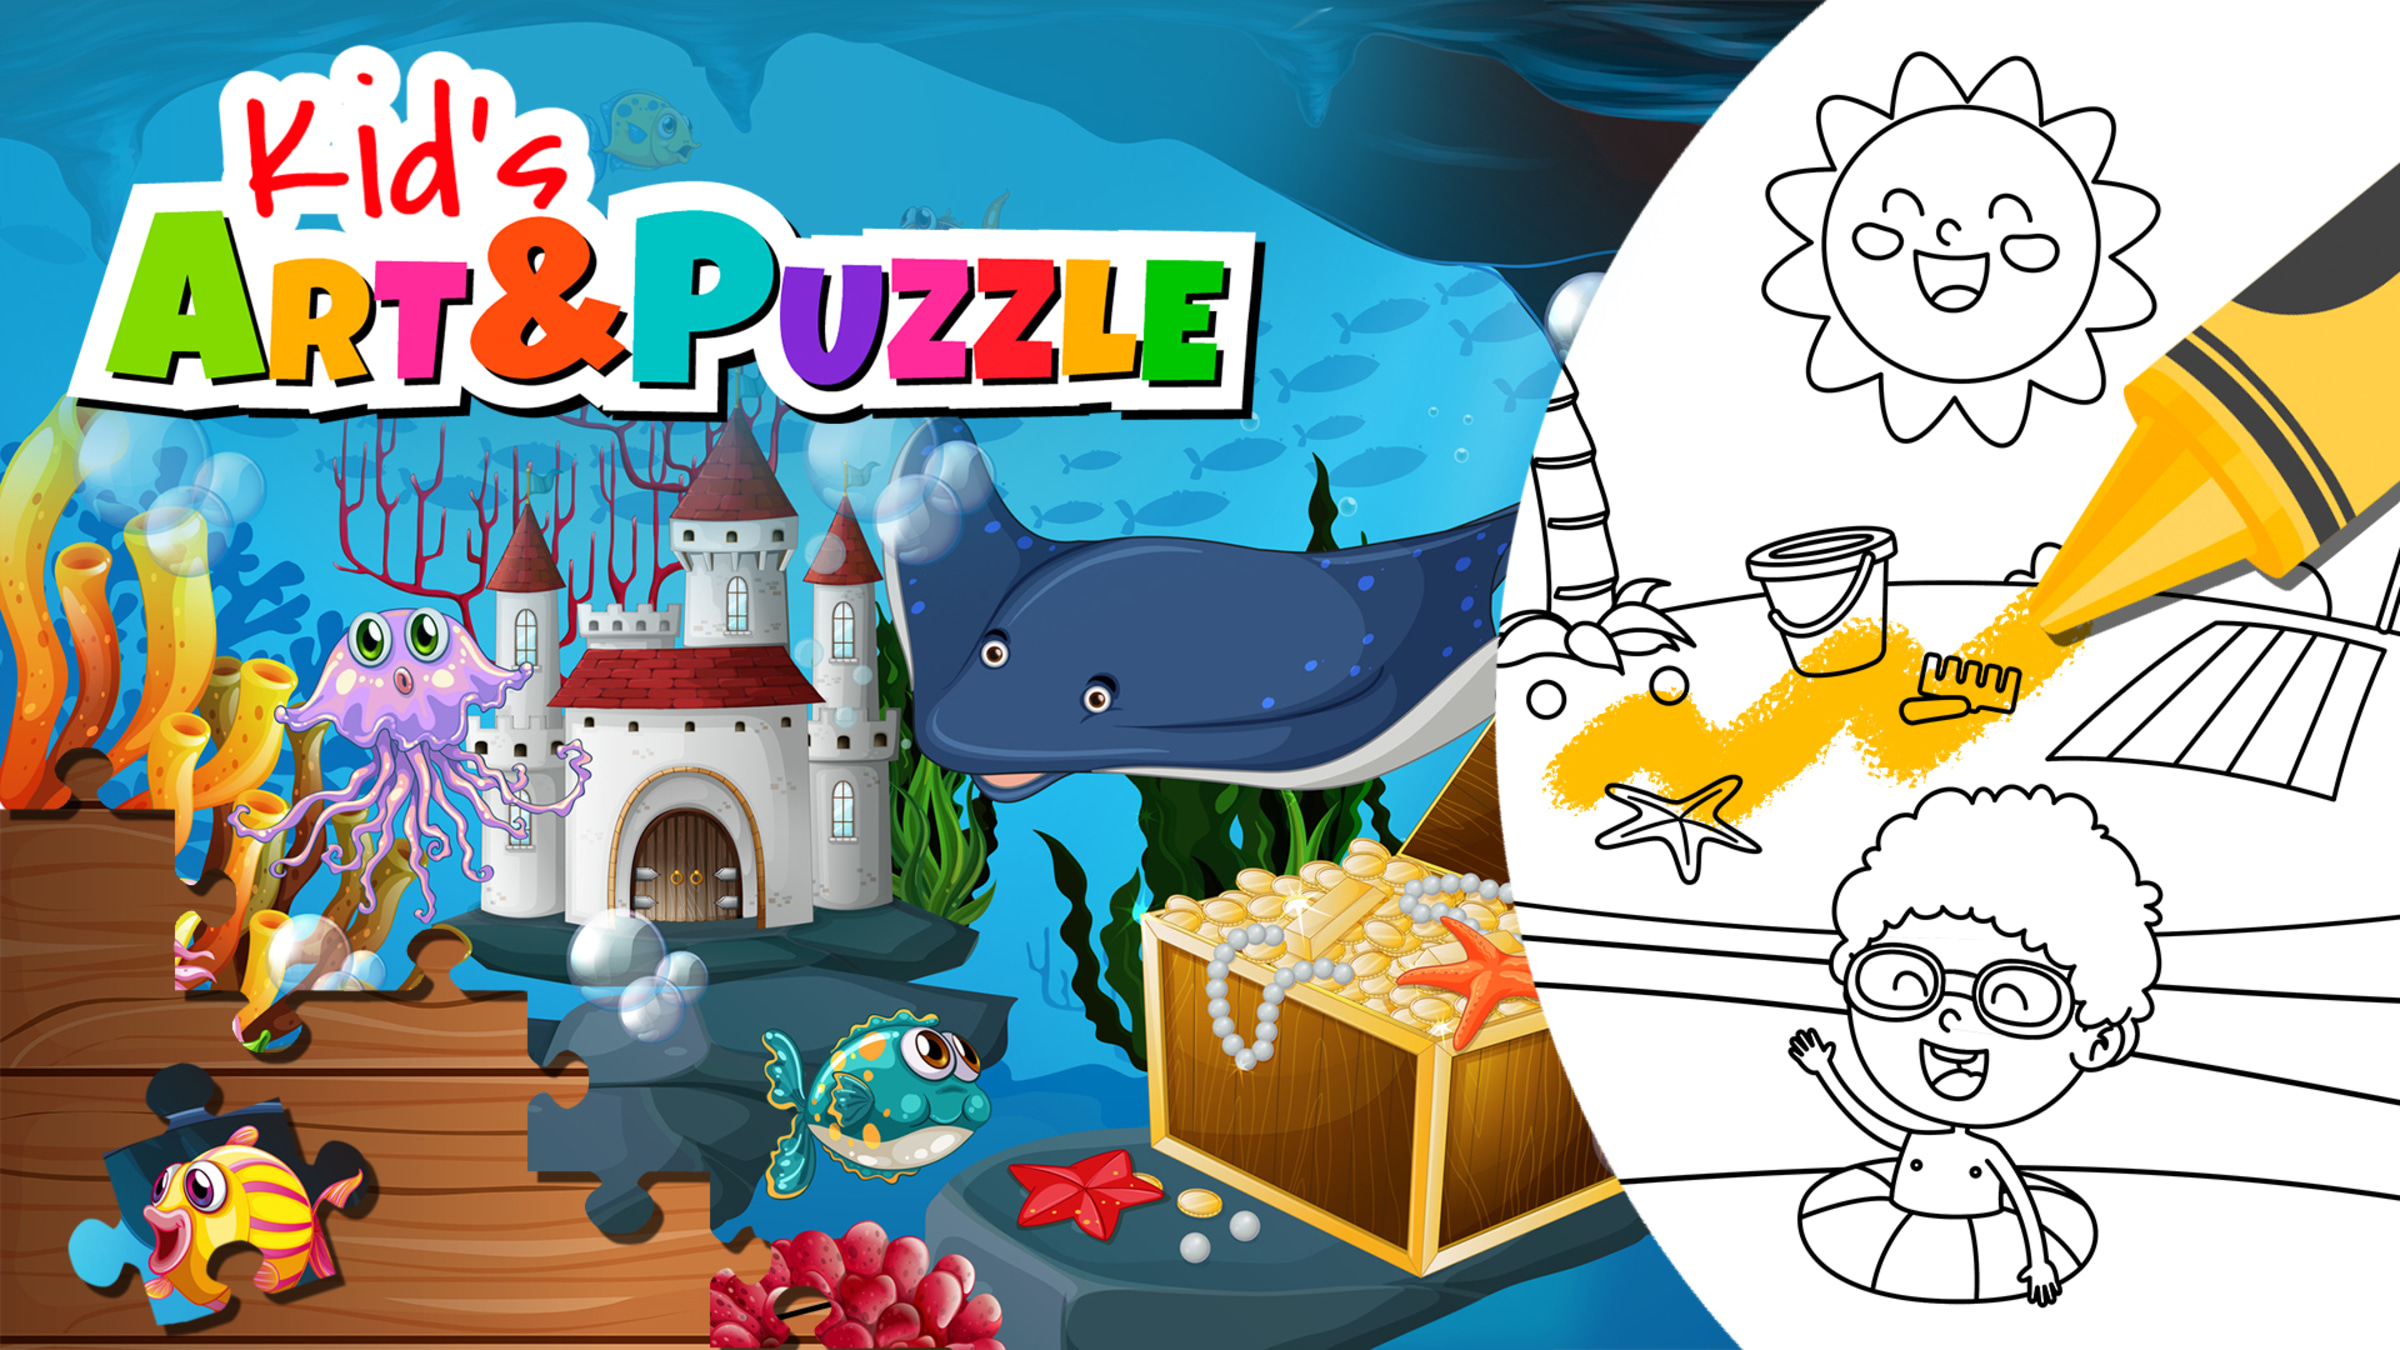 Kid's Art & Puzzle for Nintendo Switch - Nintendo Official Site